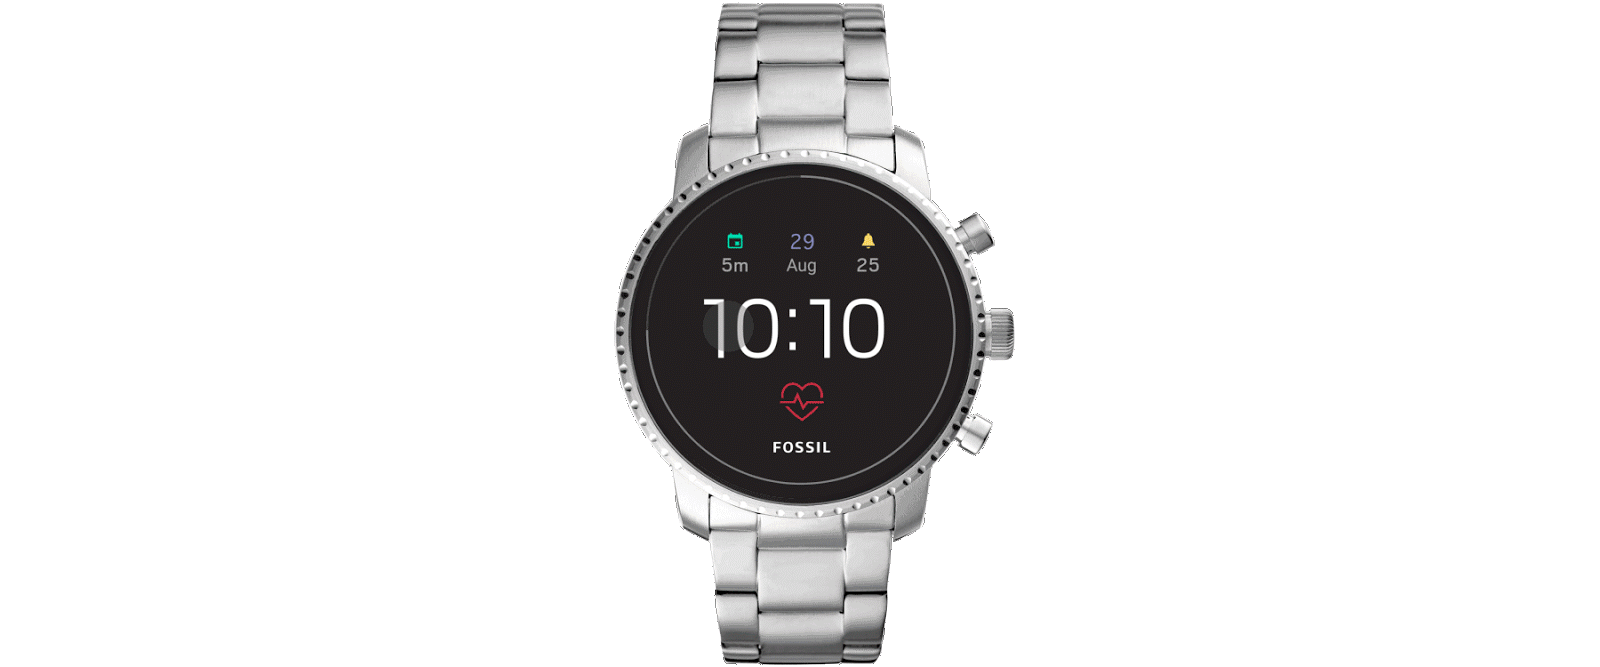 android wear os redesign navigation google 01